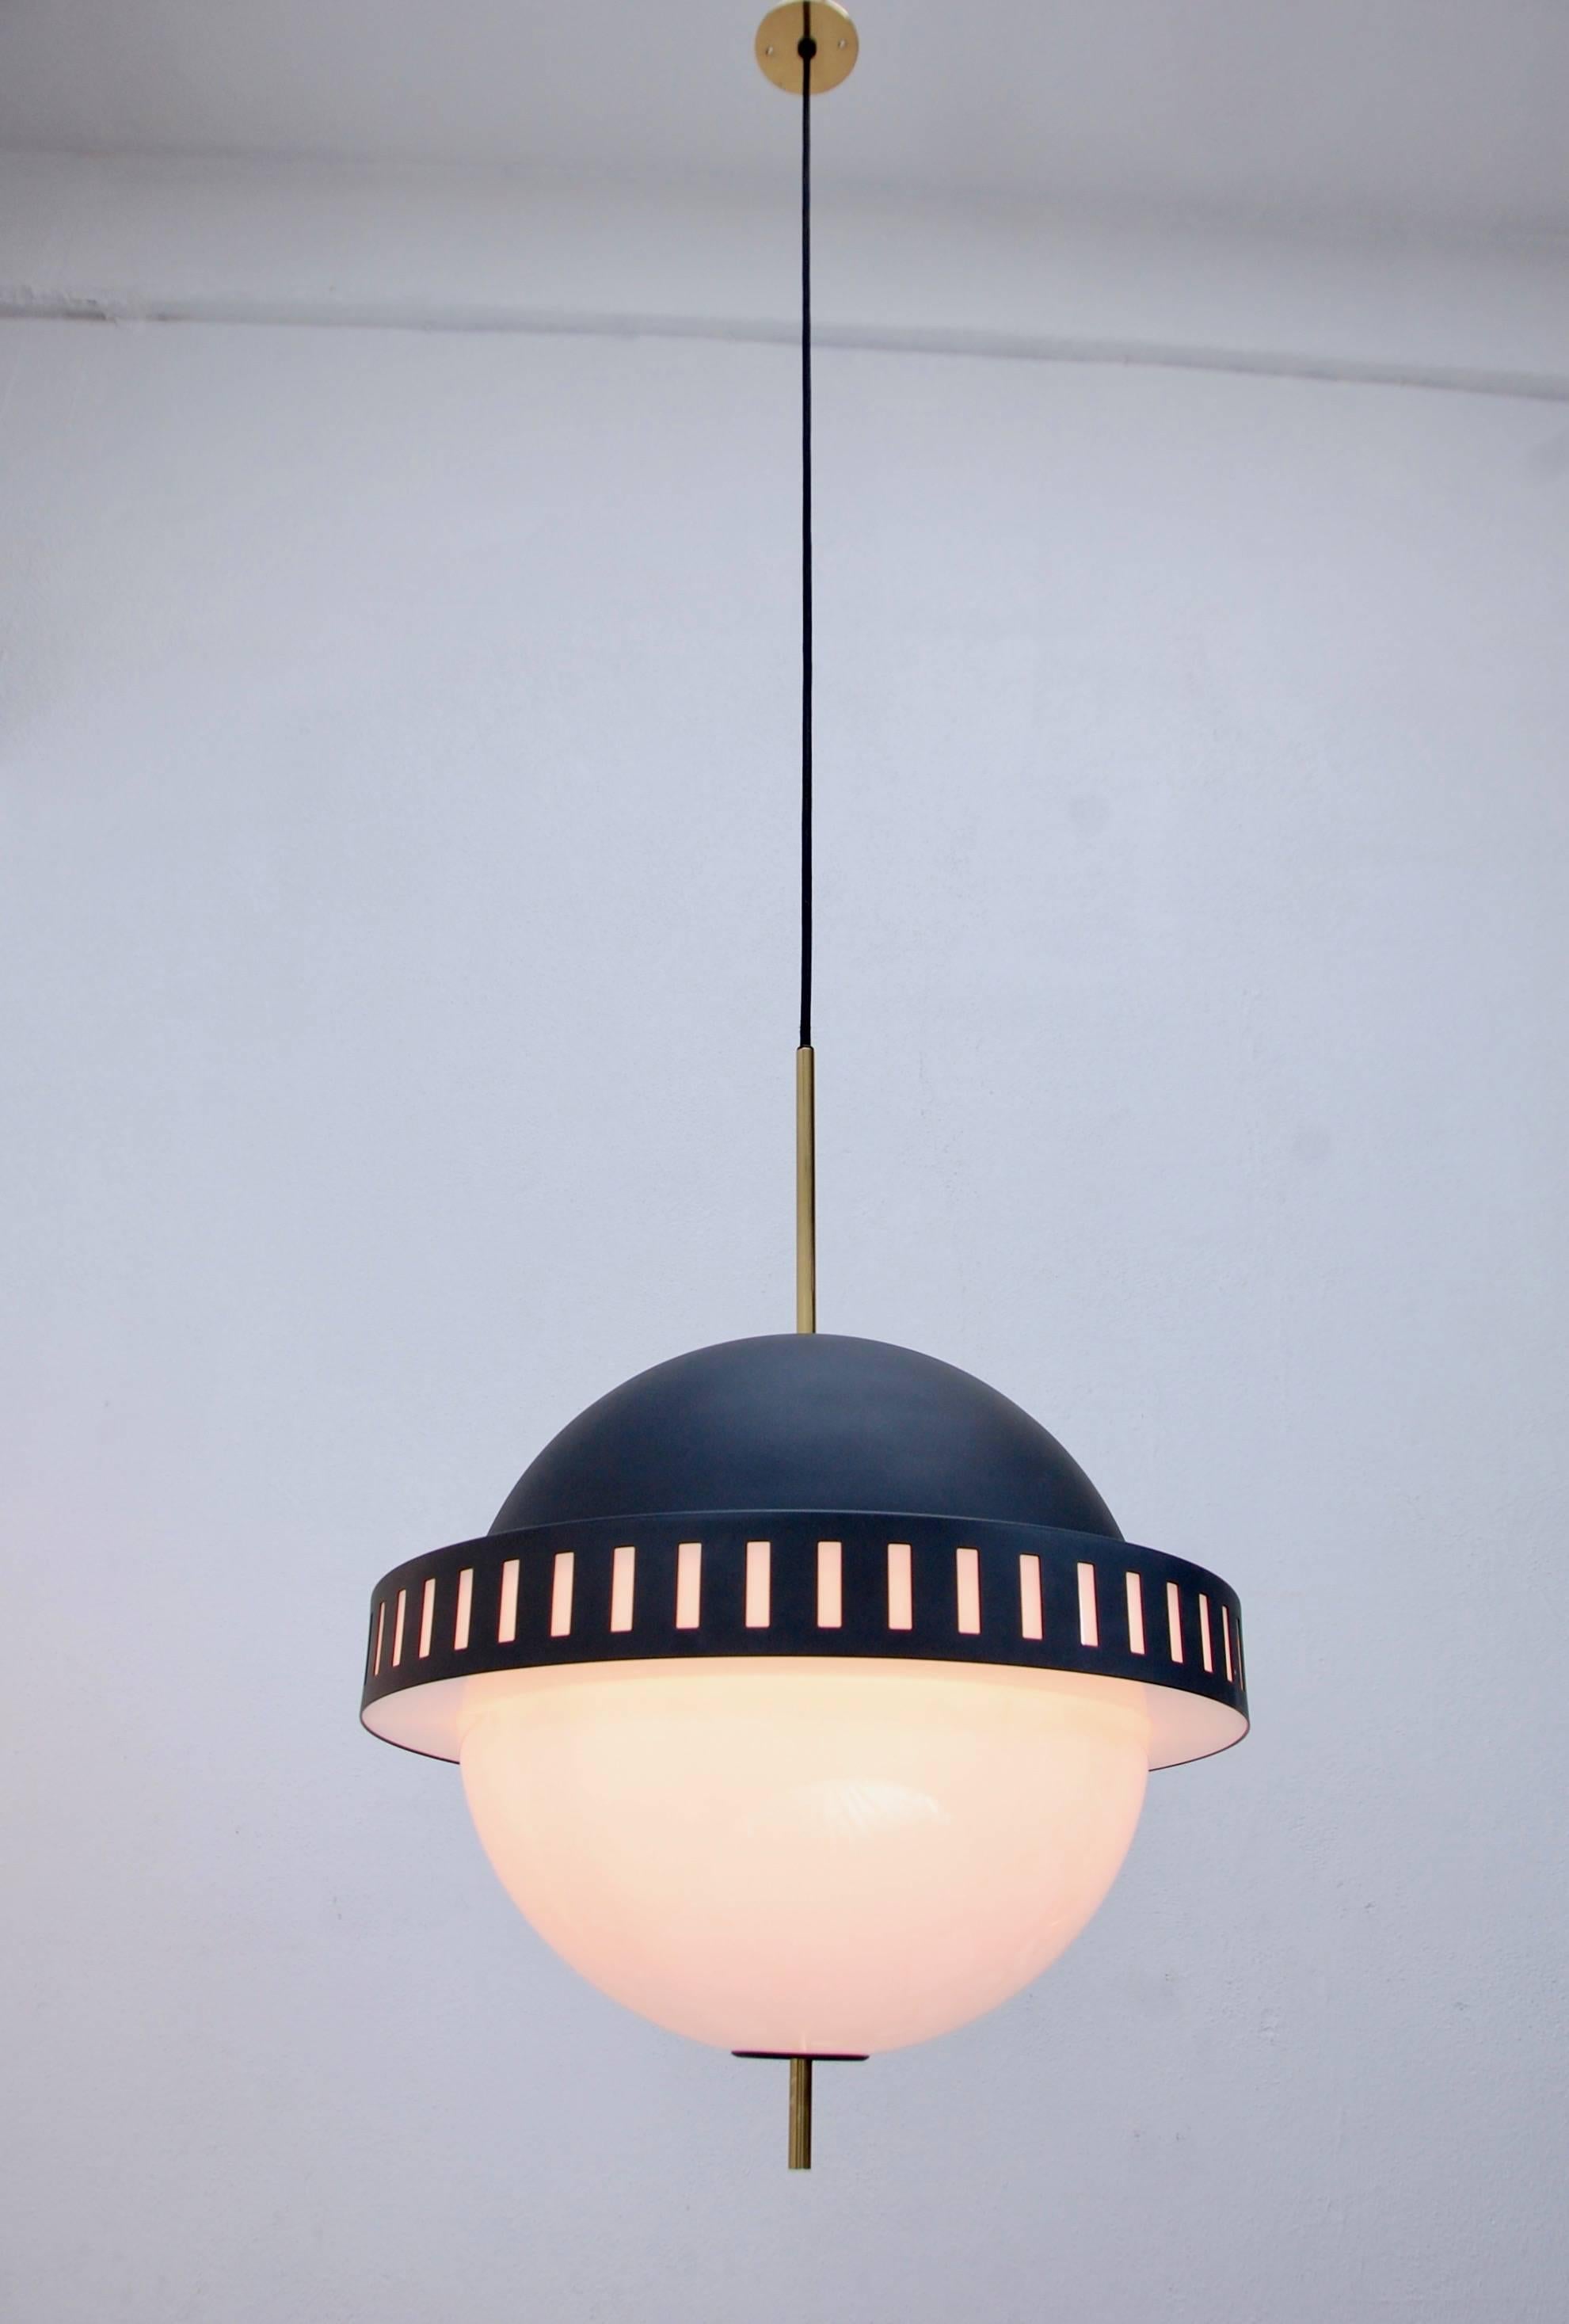 1950s formidable spherical two-tone pendant by Stilux of Italy. Current overall drop adjustable upon request.
Measures: Drop 70”
Fixture height 27”
Diameter 20”.
 